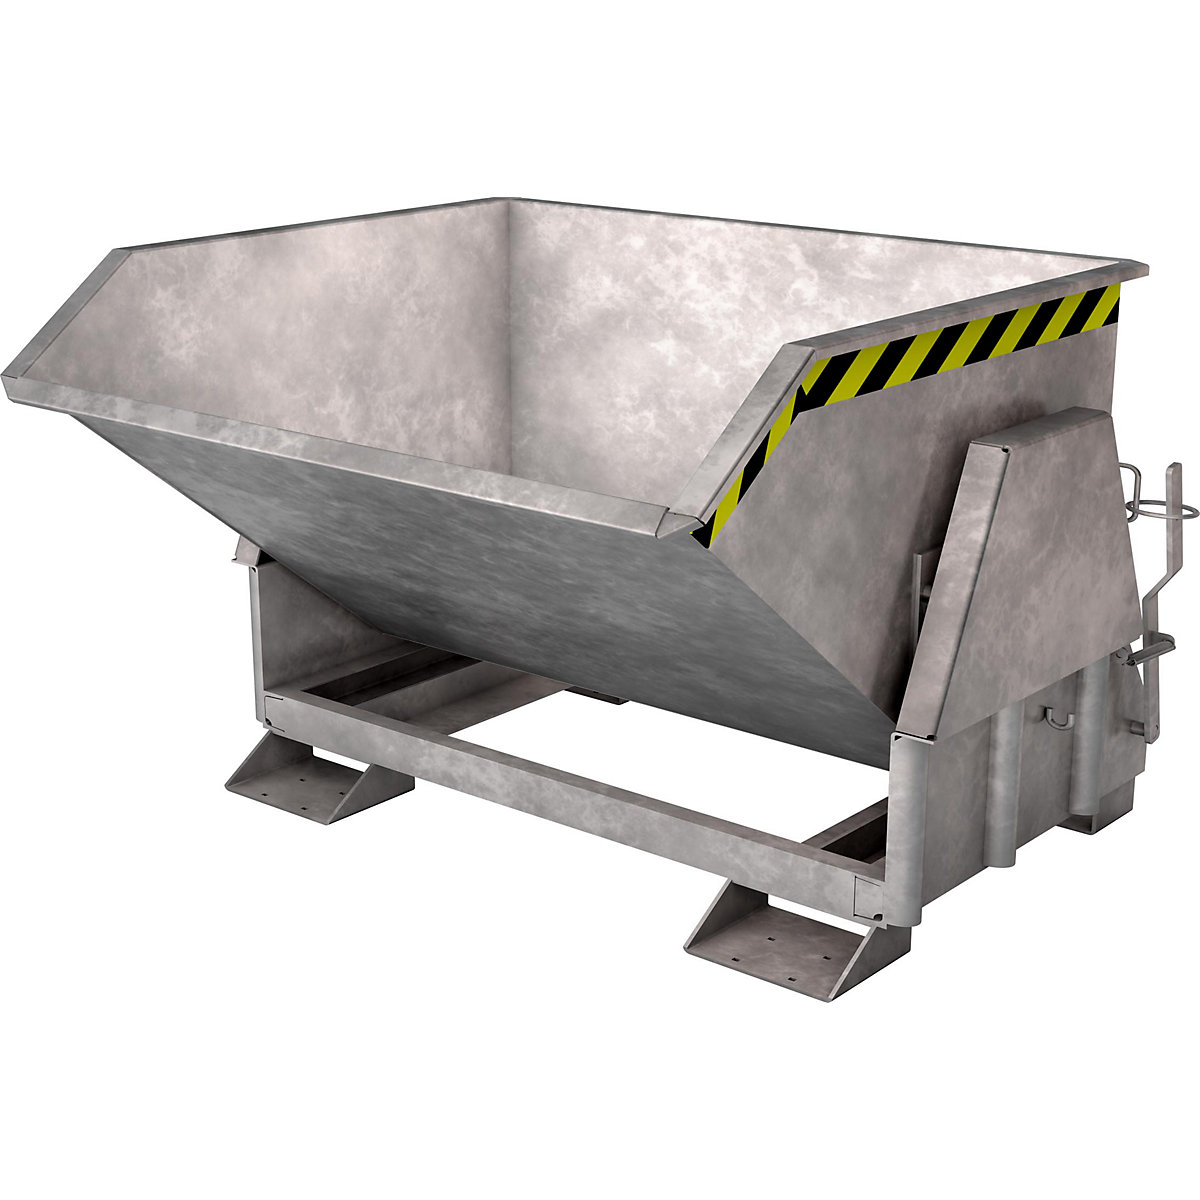 Tilting skip, standard overall height, without wheels – eurokraft pro, capacity 2.0 m³, hot dip galvanised-6